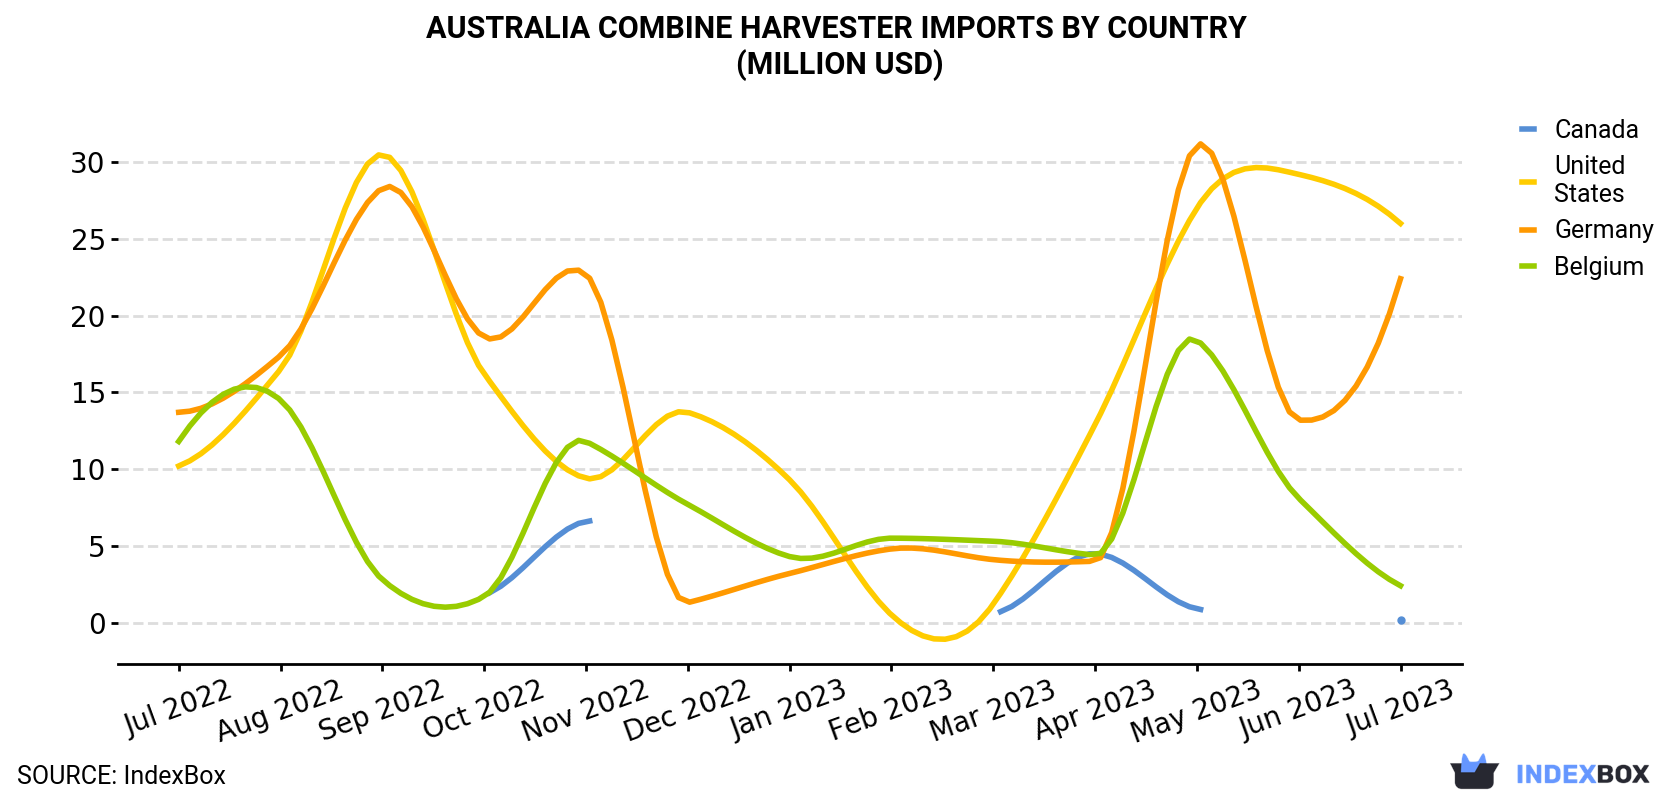 Australia Combine Harvester Imports By Country (Million USD)